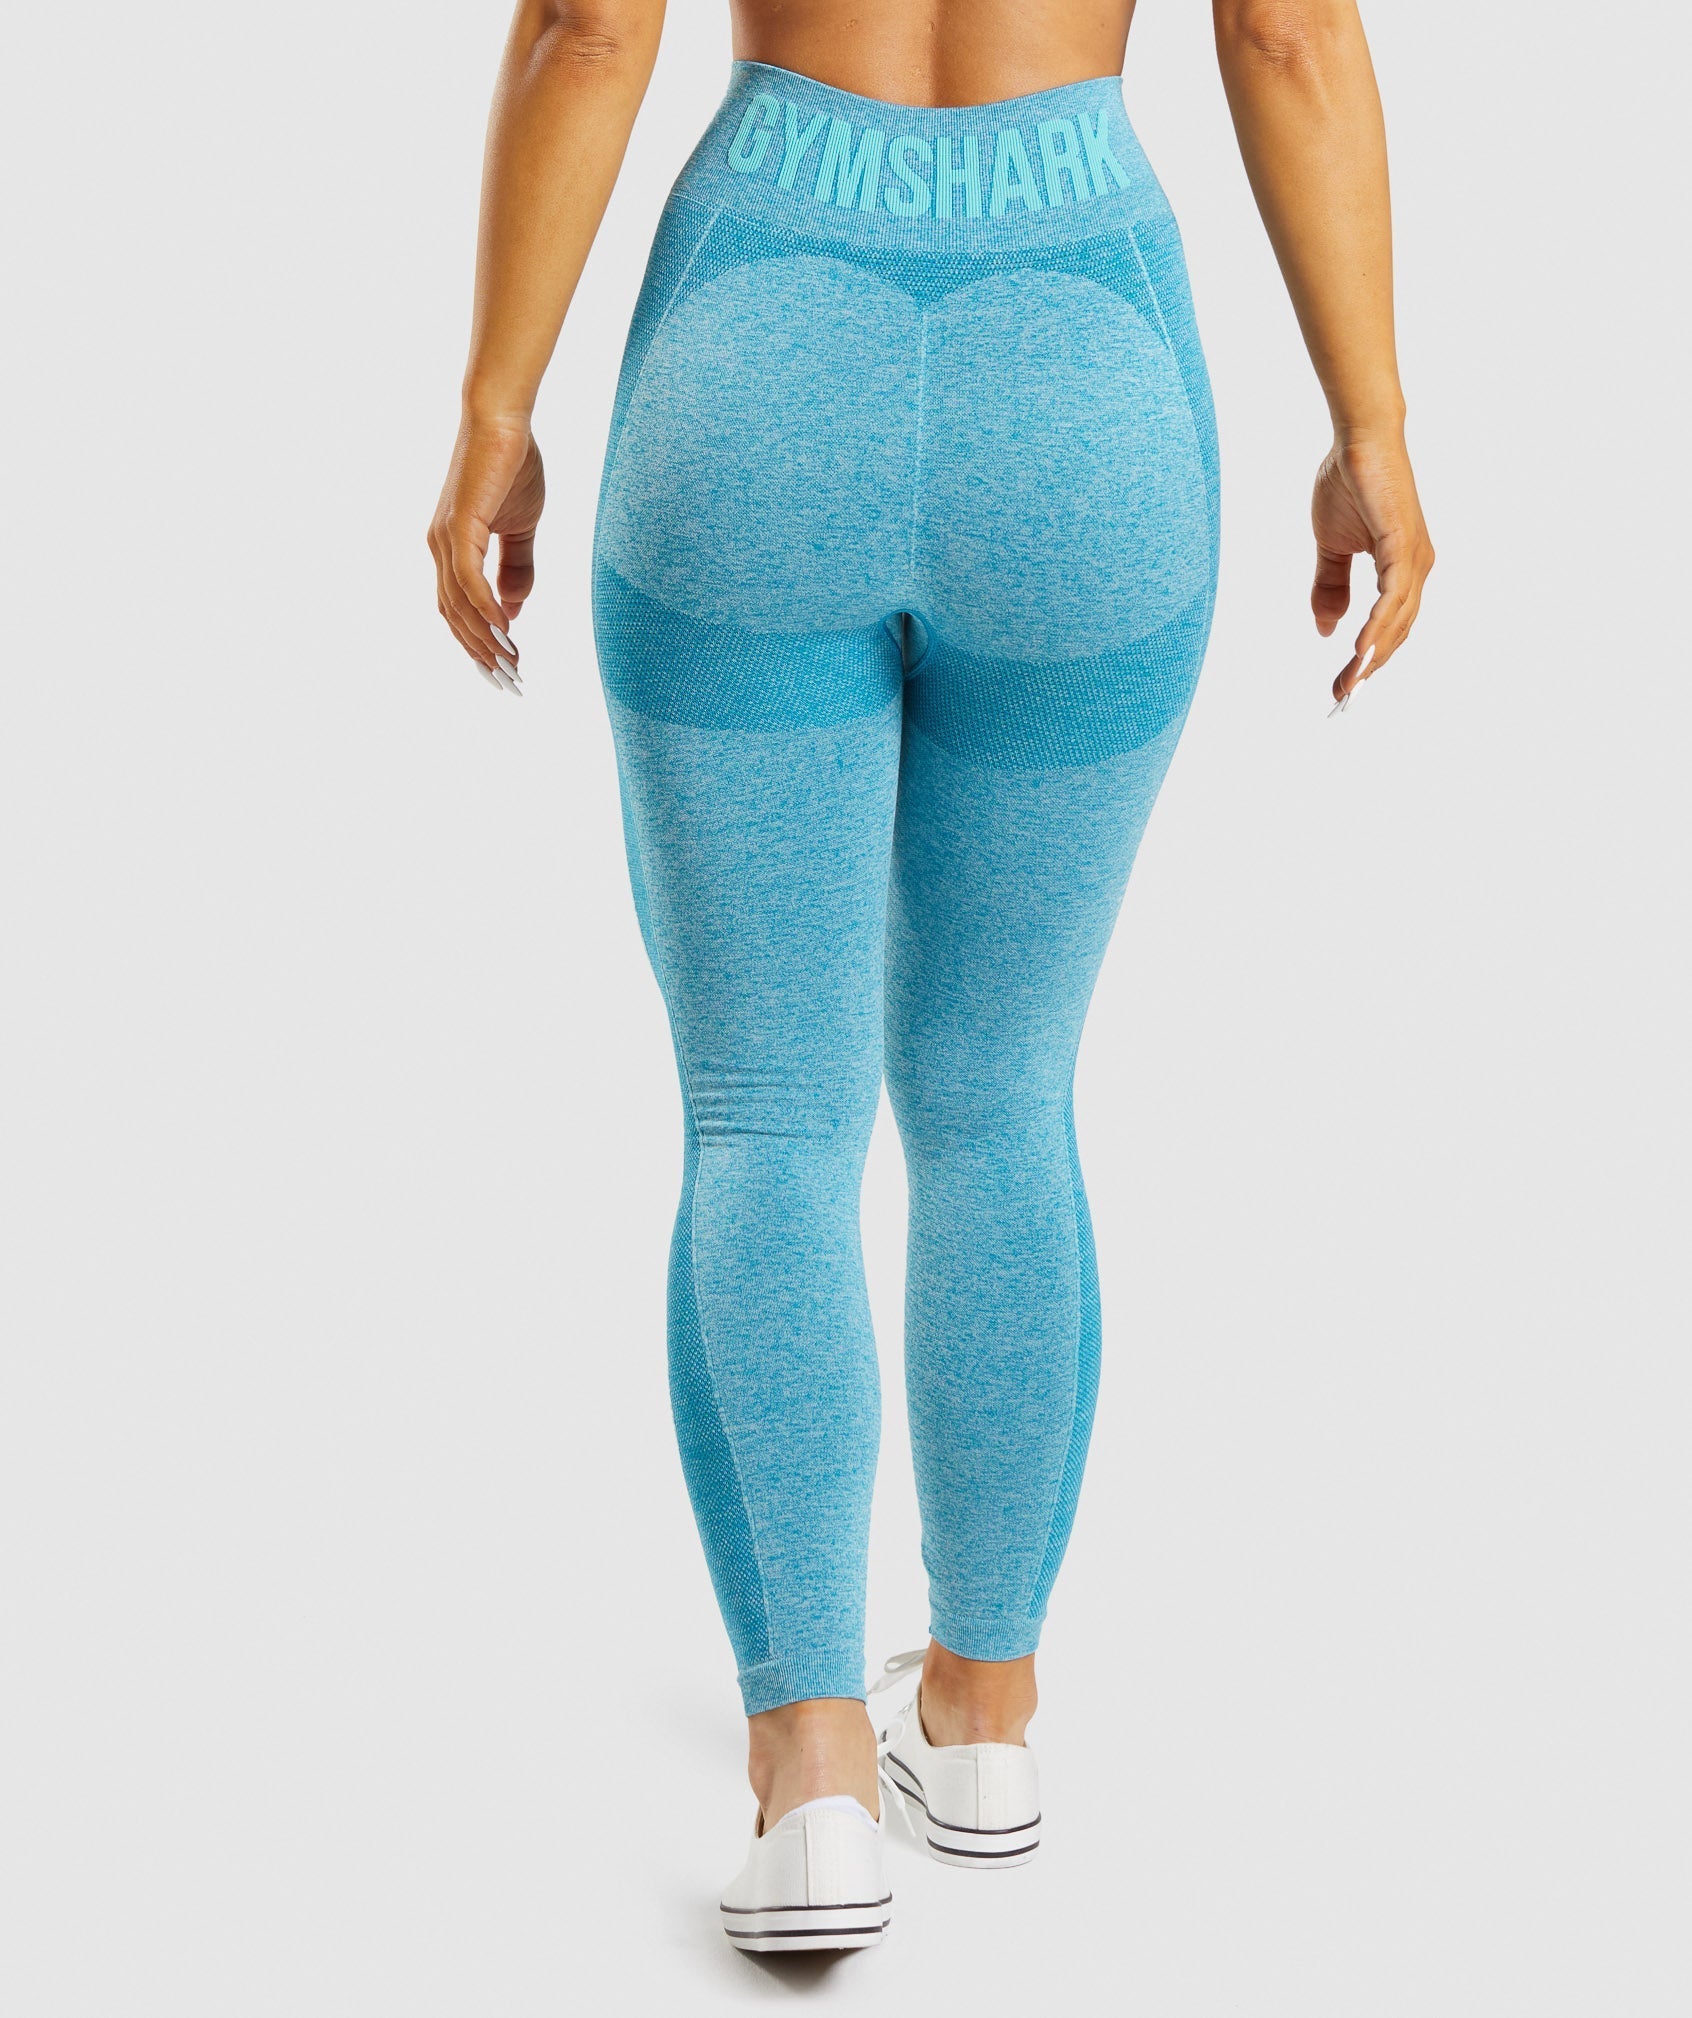 Gymshark Flex High Waisted Leggings Size XS - $40 (20% Off Retail) New With  Tags - From Gabby